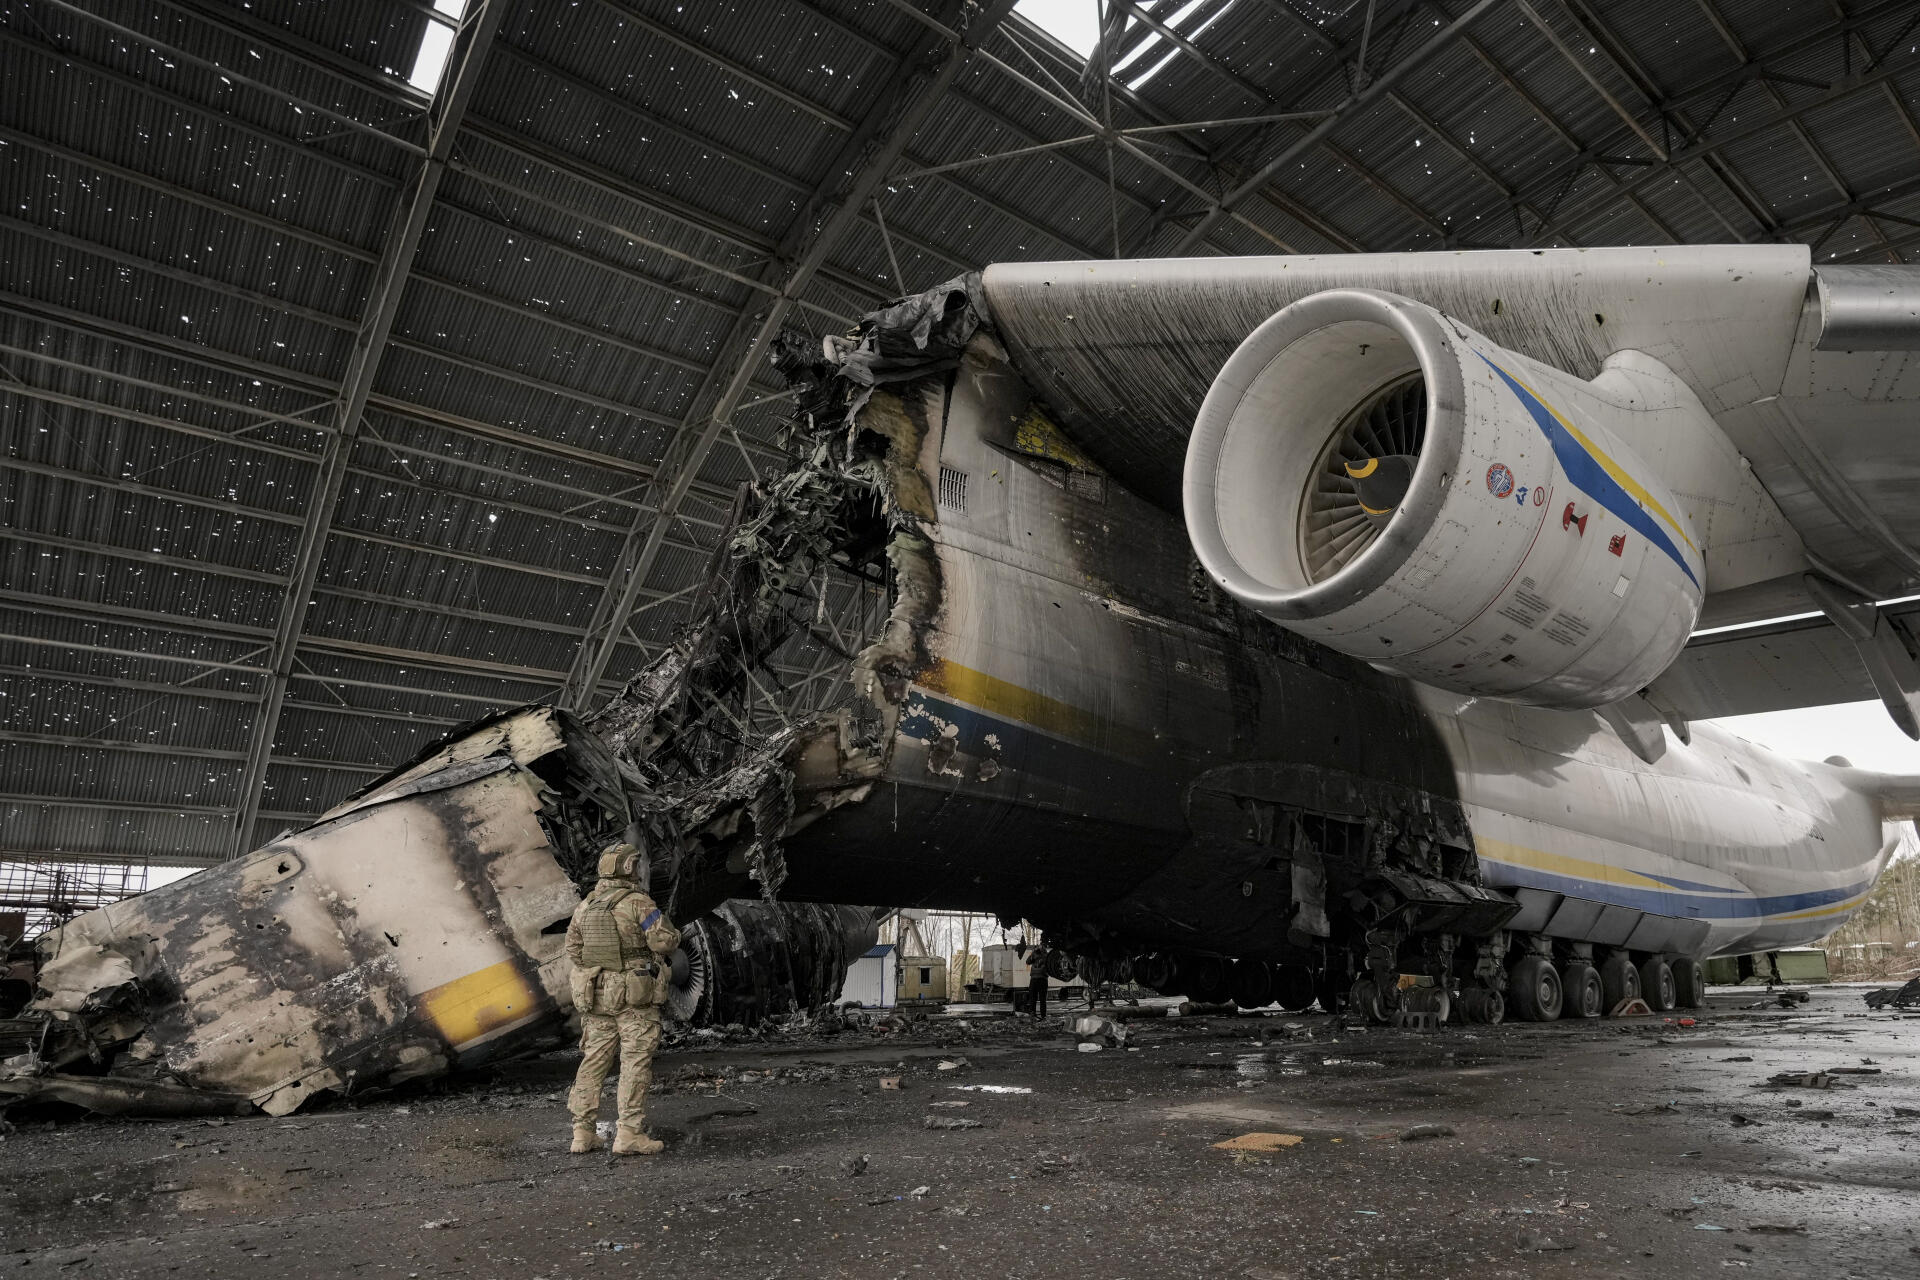 A Ukrainian soldier walks near a destroyed Antonov An-225 Mriya plane during fighting between Russian and Ukrainian forces at Antonov airport in Hostomel on Saturday (April 2).